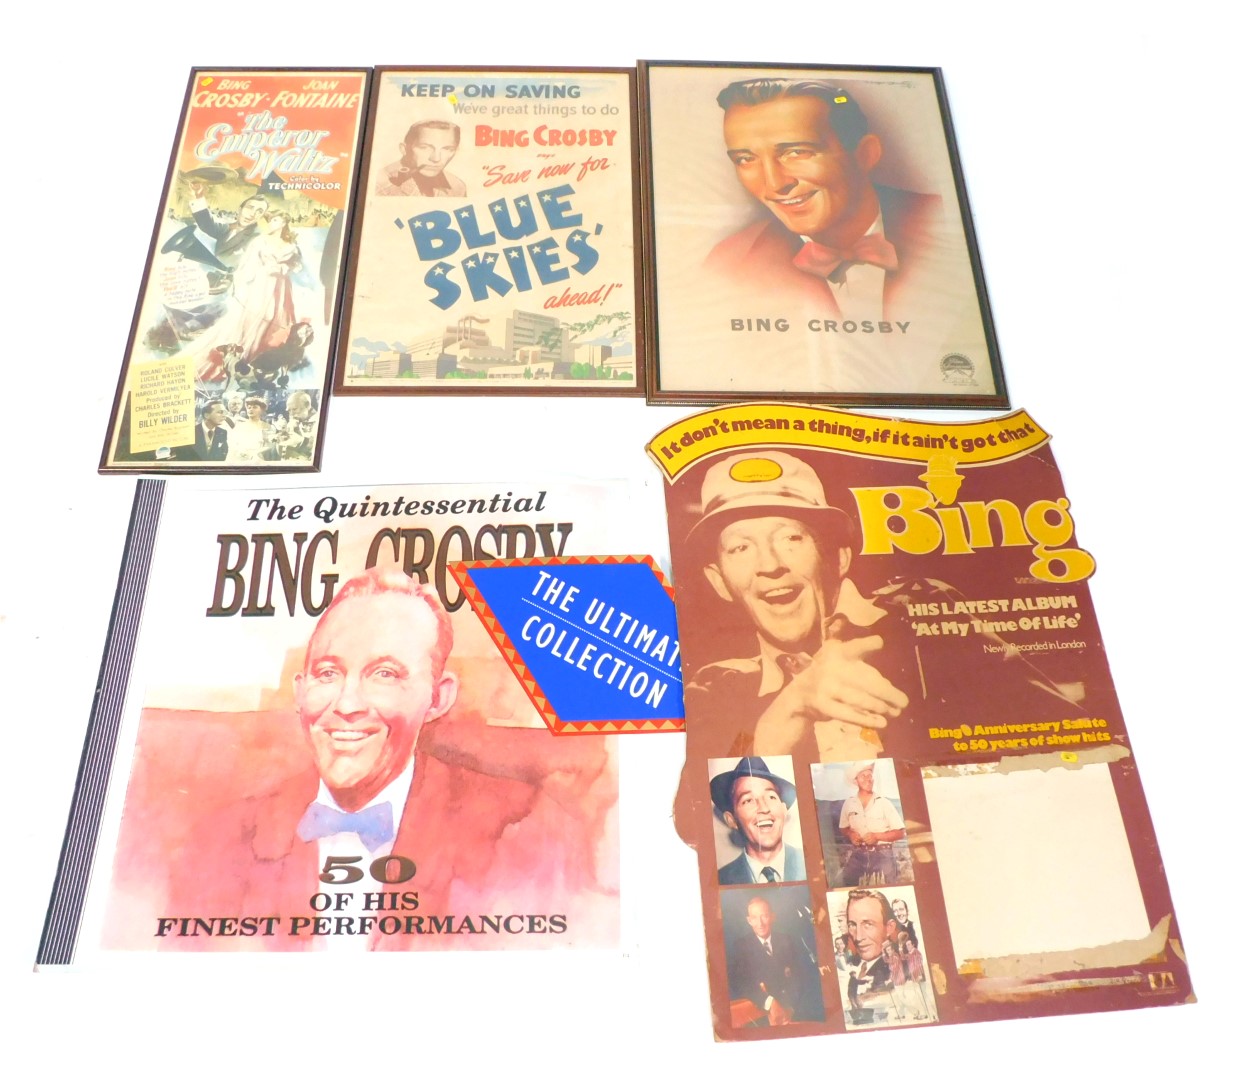 A collection of Bing Crosby posters, to include advertising 'Keep on Saving We've Great Things to do